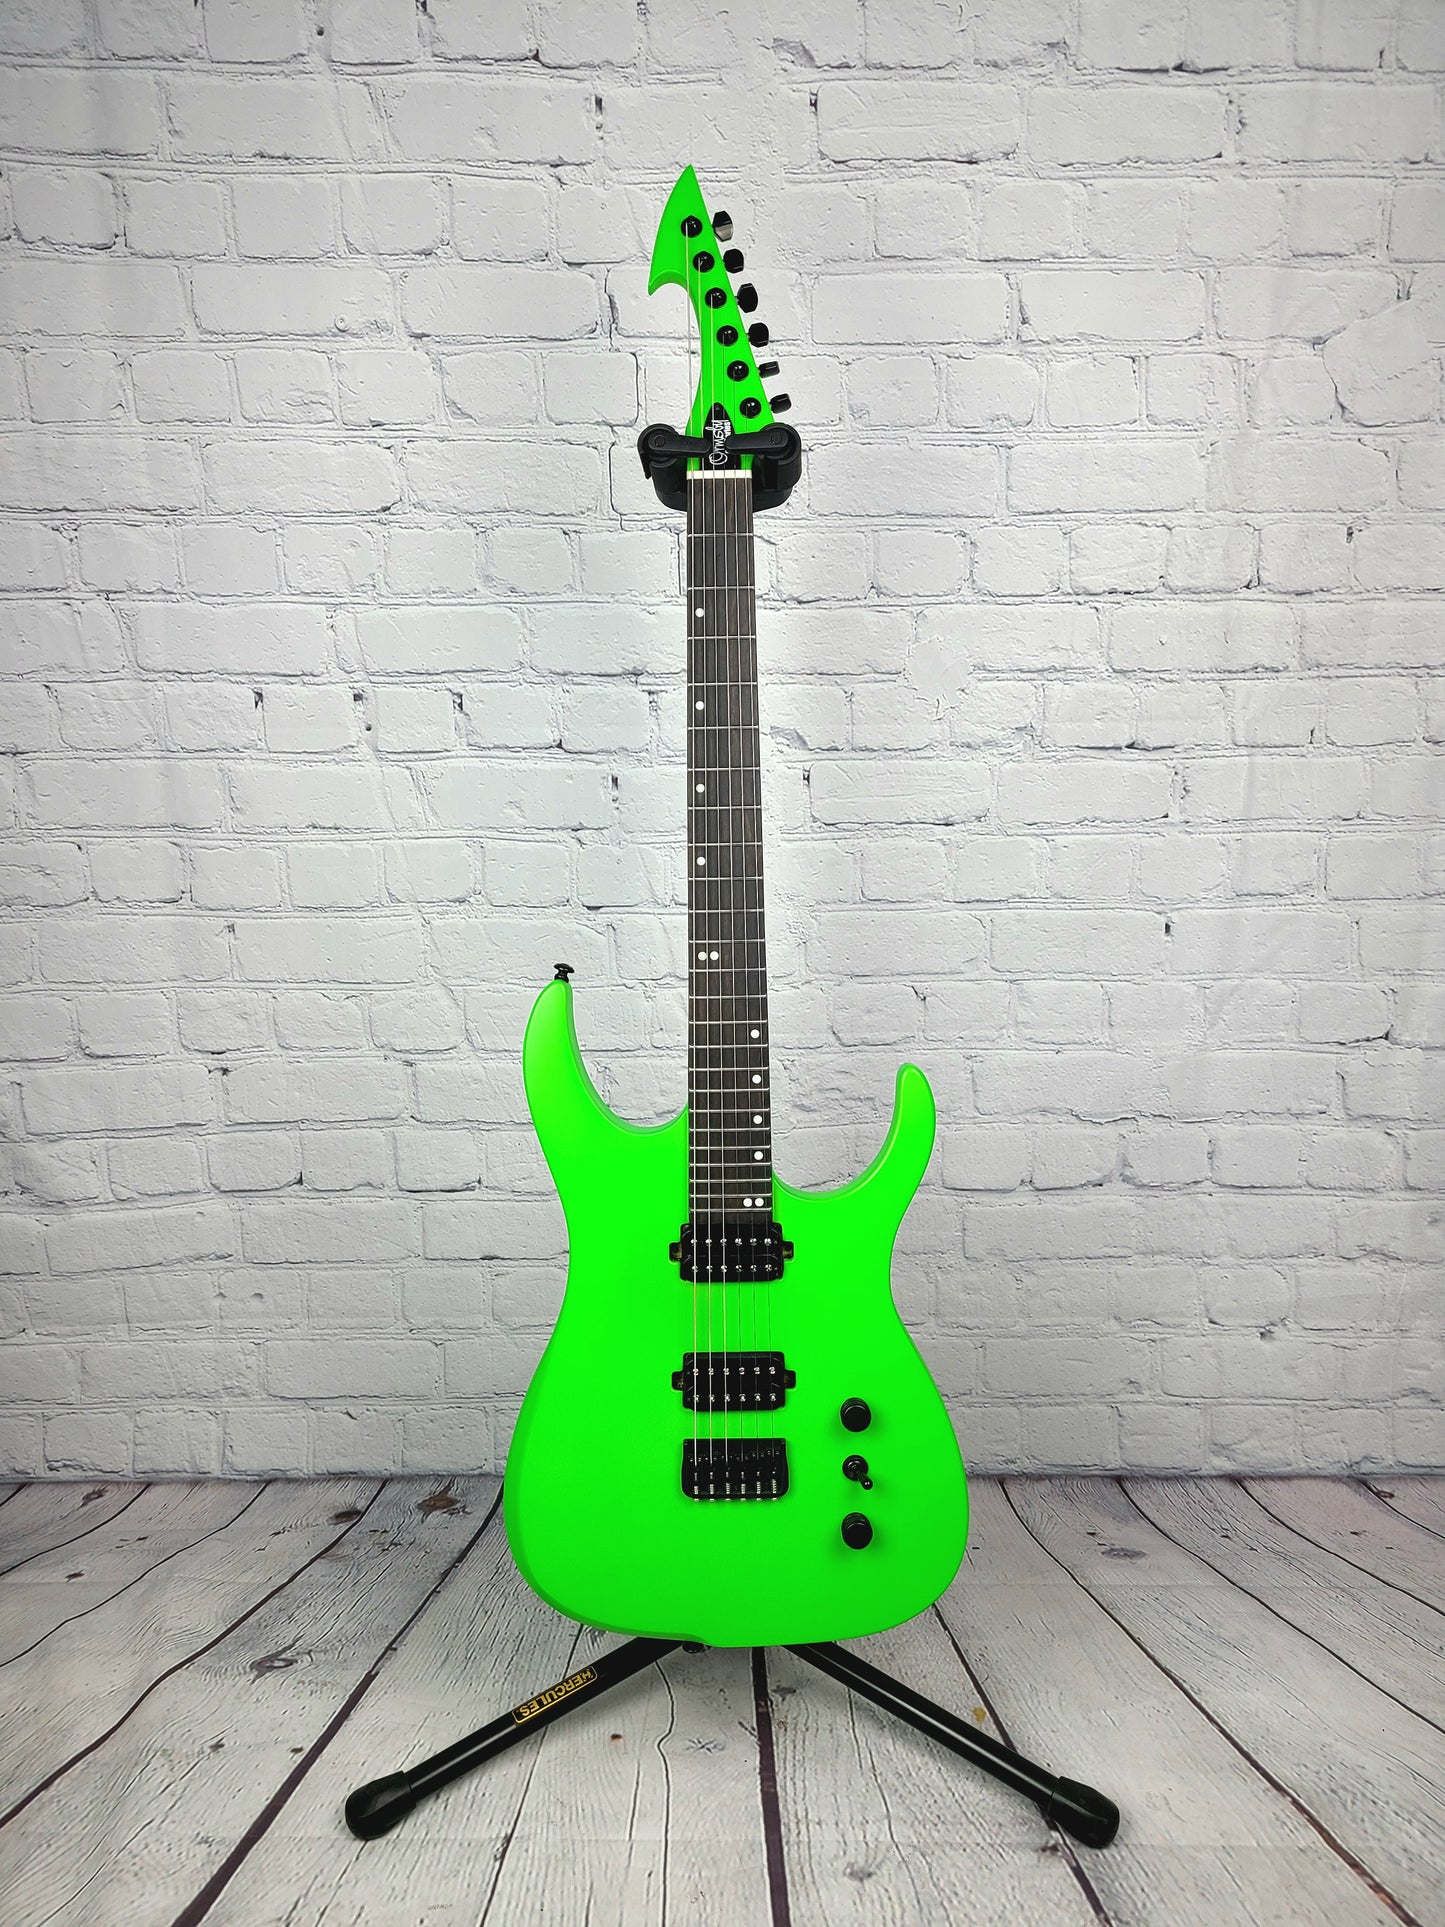 Ormsby Guitars Hype GTI 6 String Toxic Green Electric Guitar Standard Scale